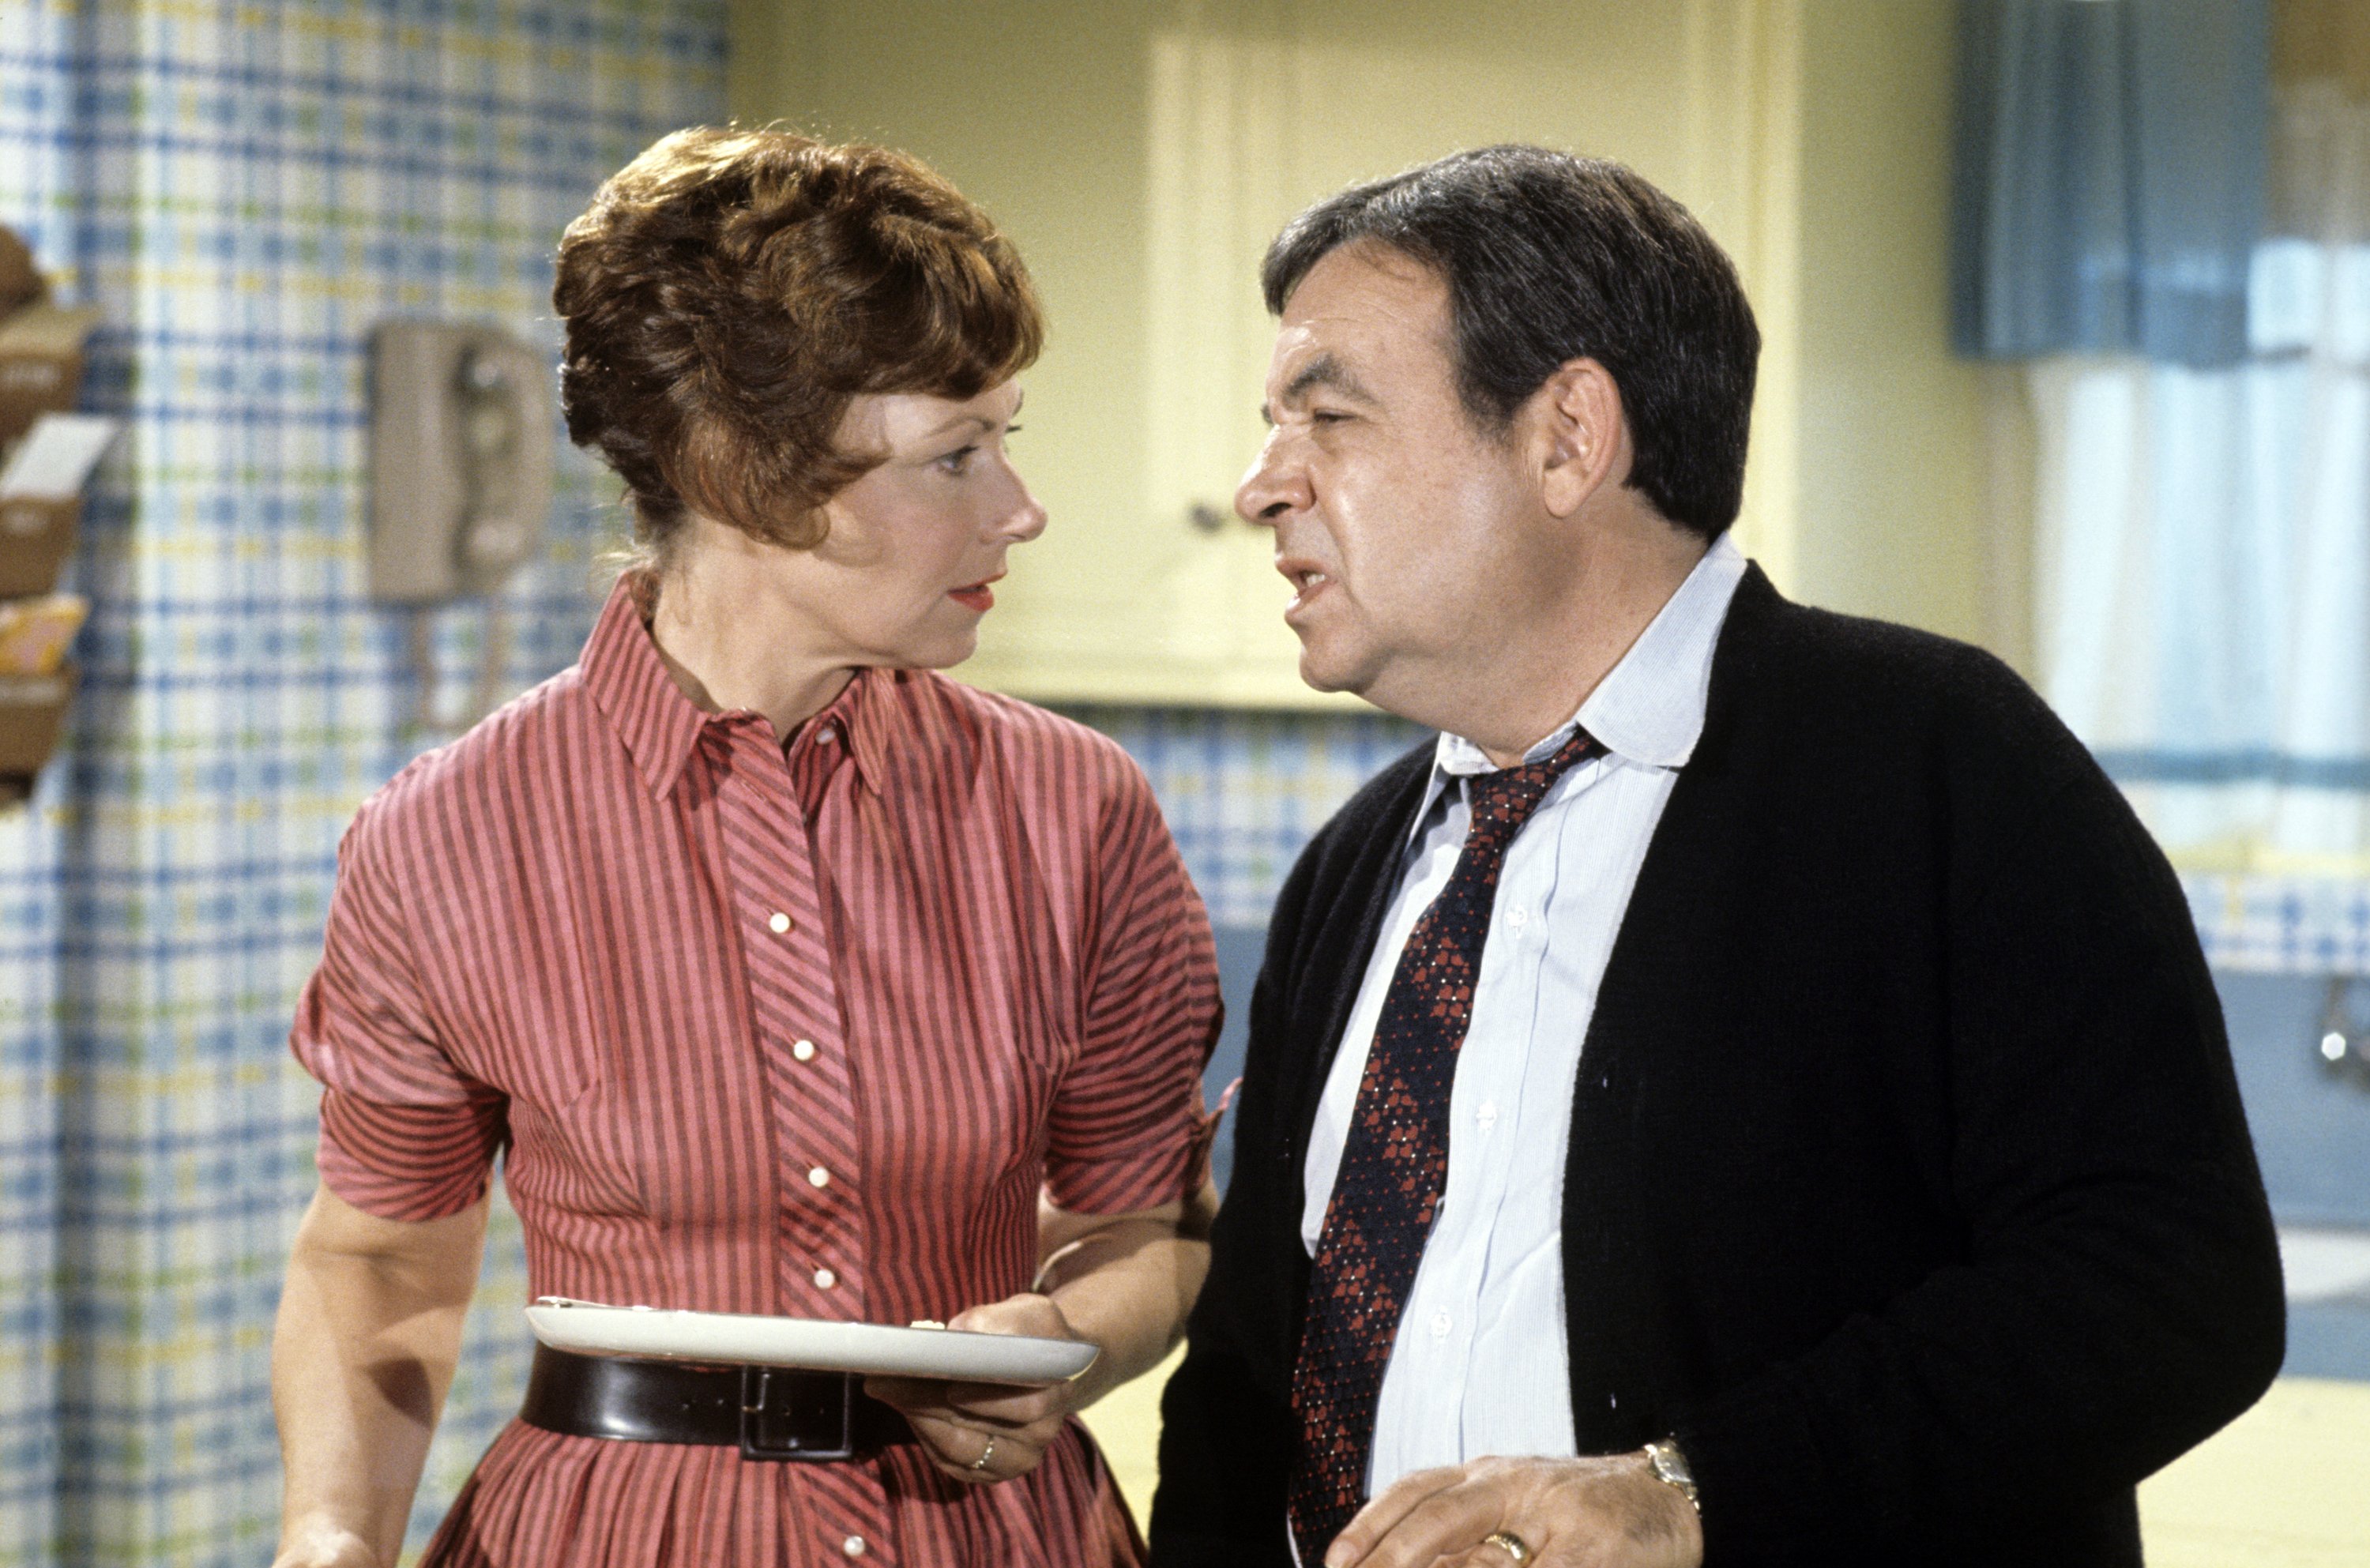 Marion Ross (Marion), Tom Bosley (Howard) on "Happy Days,"  January 15, 1974. | Source: Getty Images